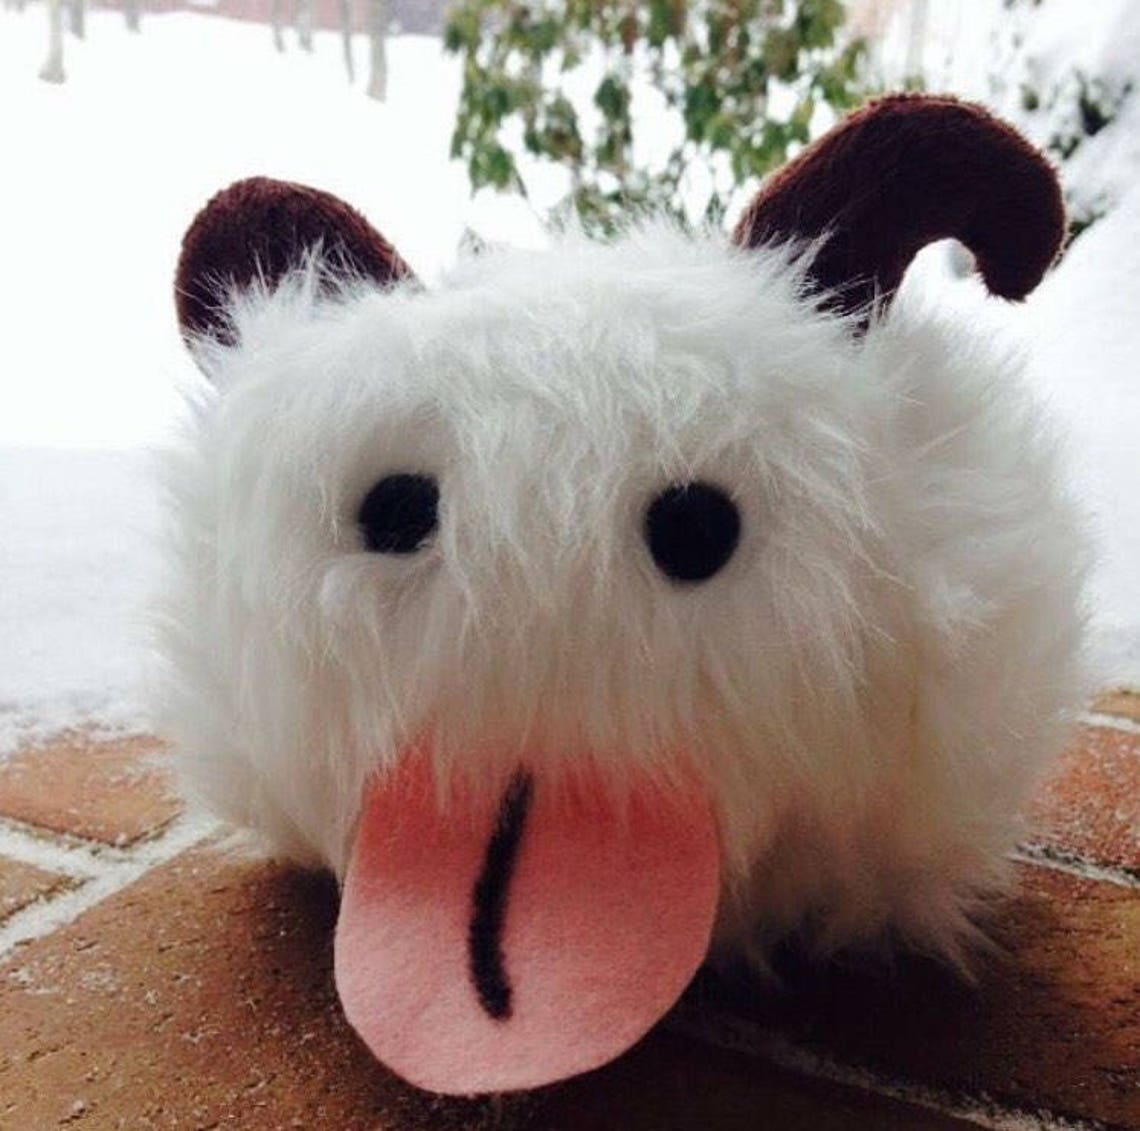 Poro From League Of Legends Inspired Furry Stuf